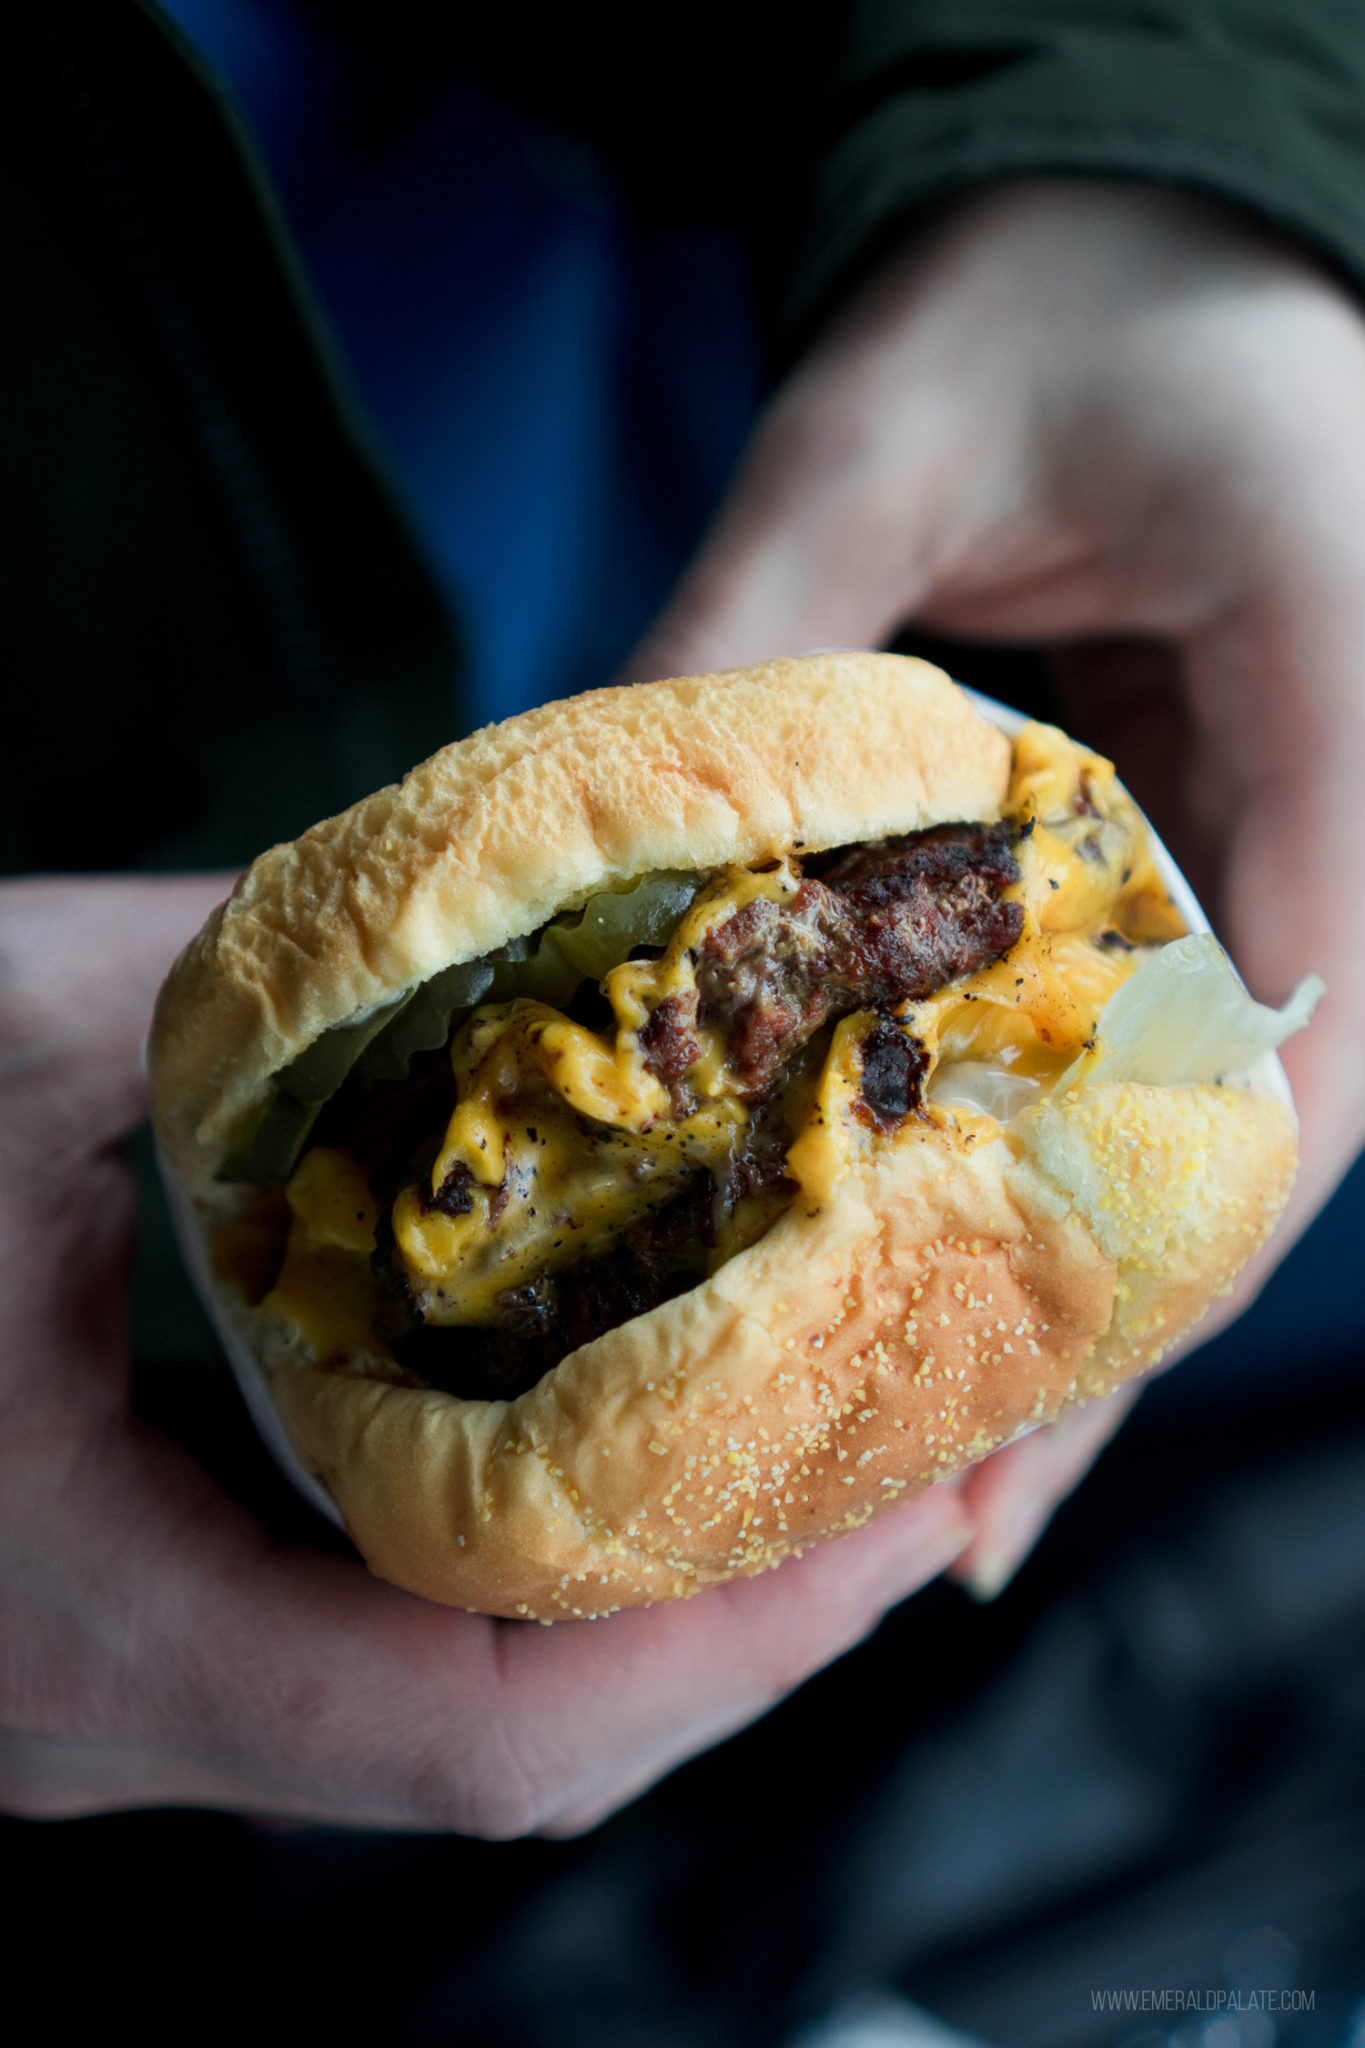 Best Burgers in Seattle: A Local's Definitive List | The Emerald Palate